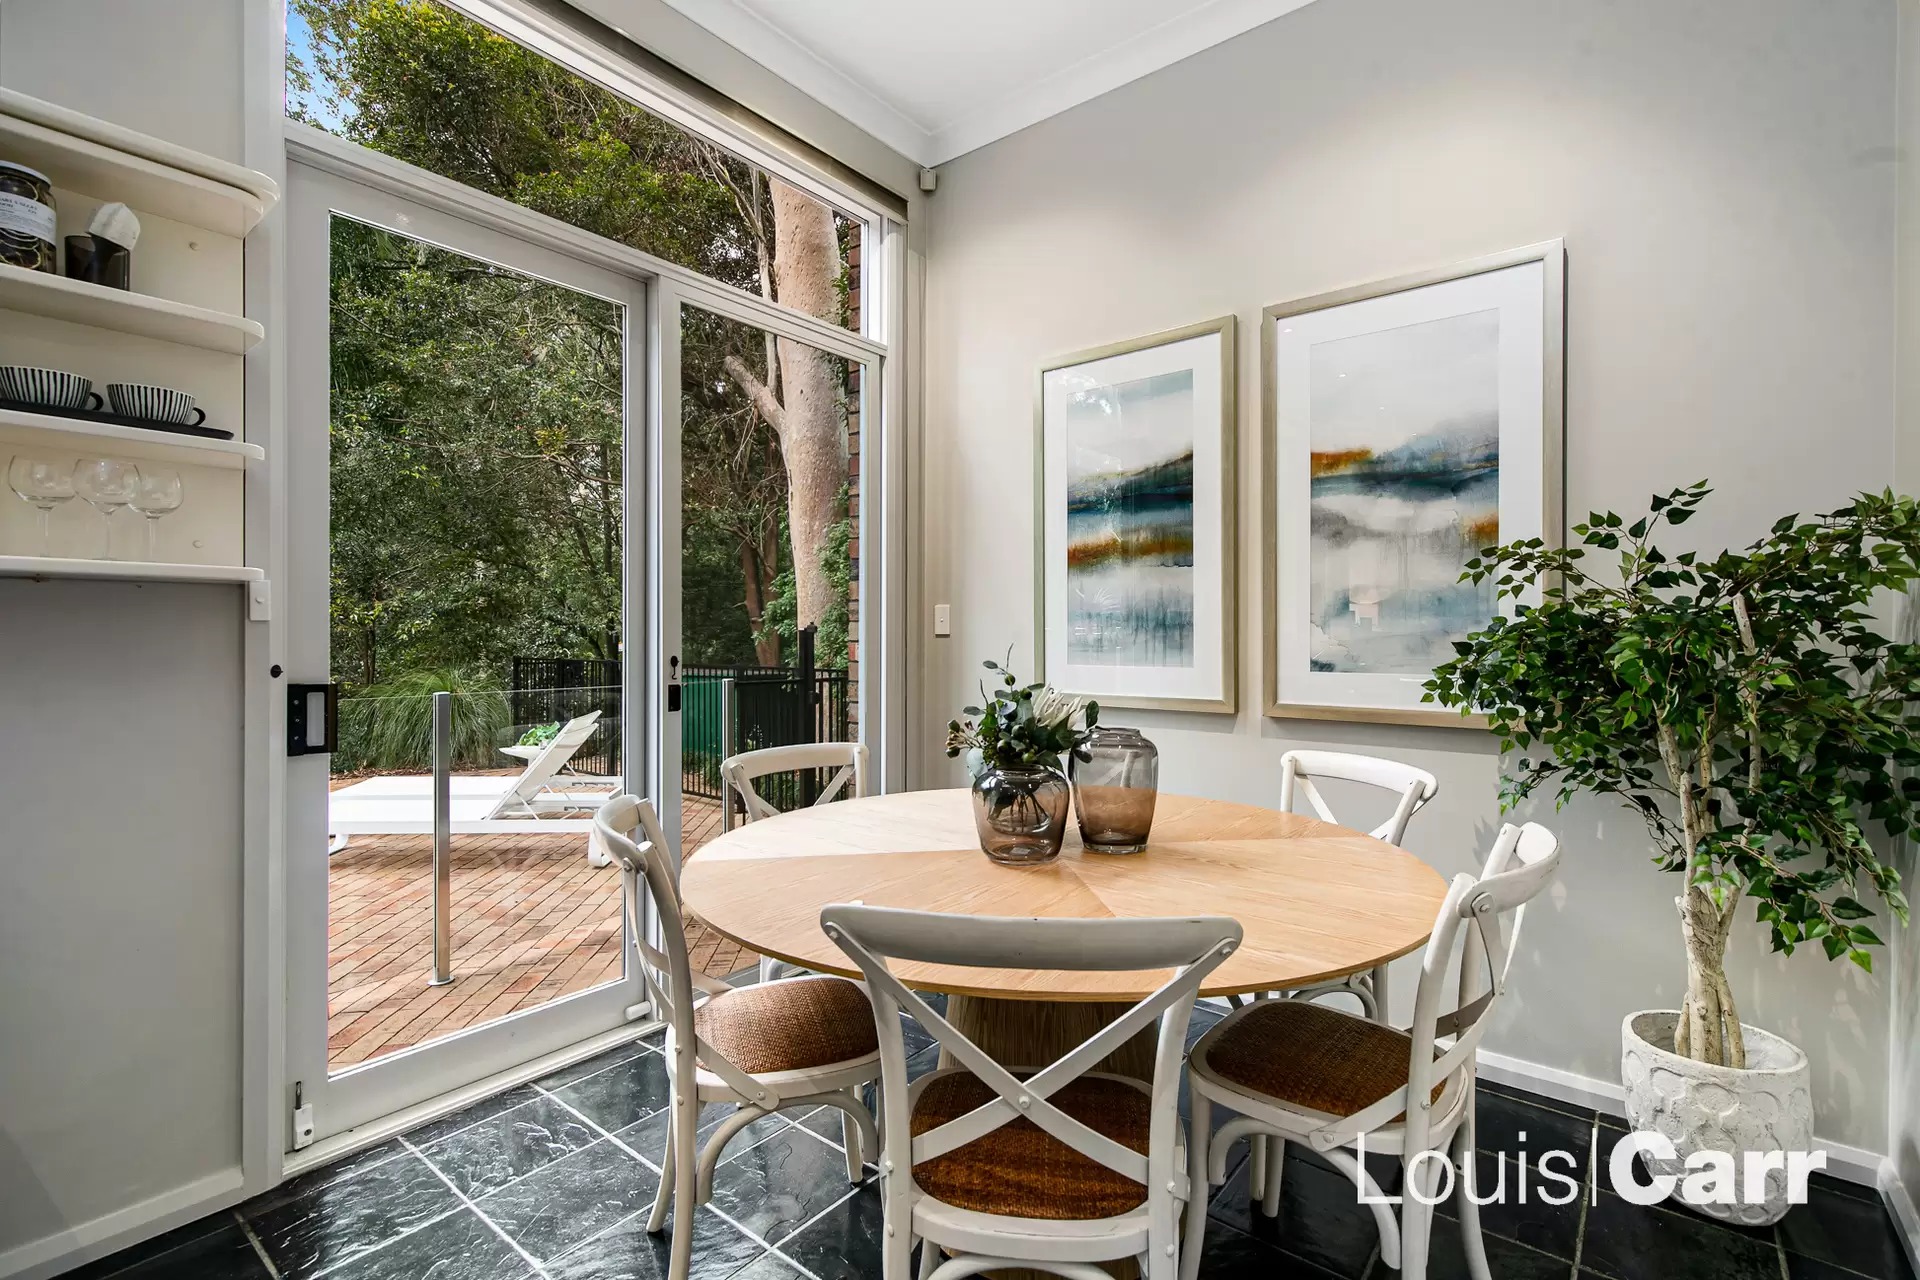 Photo #7: 14 Heidi Place, West Pennant Hills - Sold by Louis Carr Real Estate